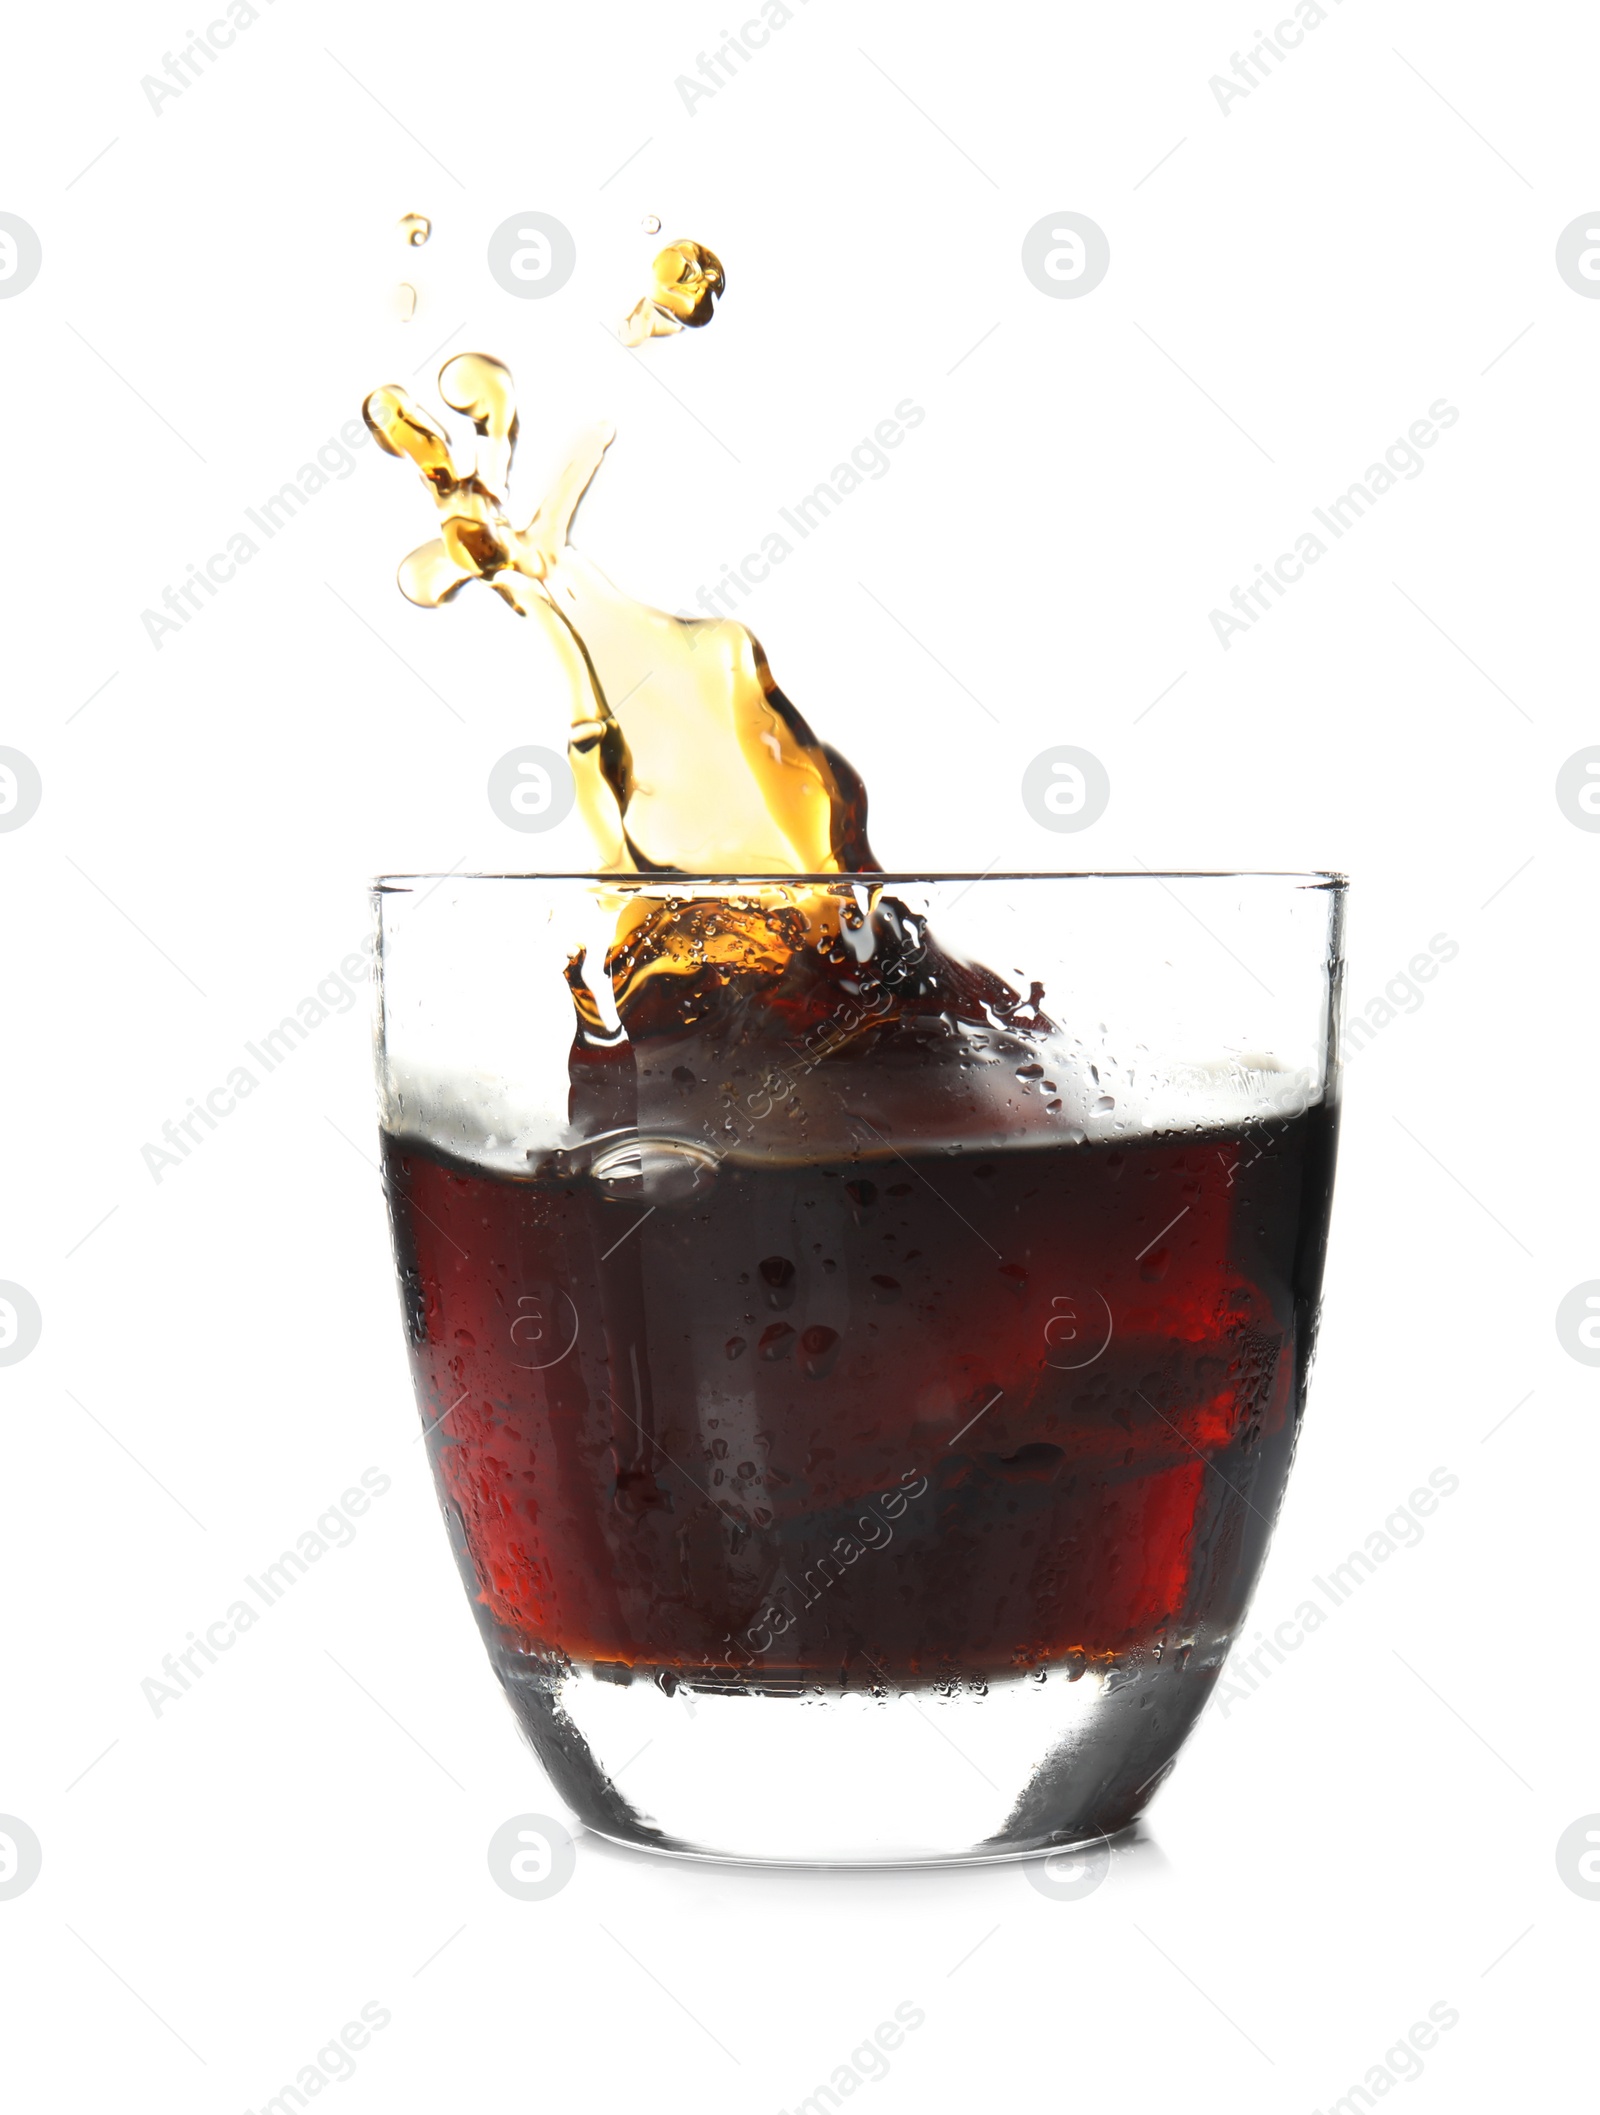 Photo of Splash of cola in glass on white background